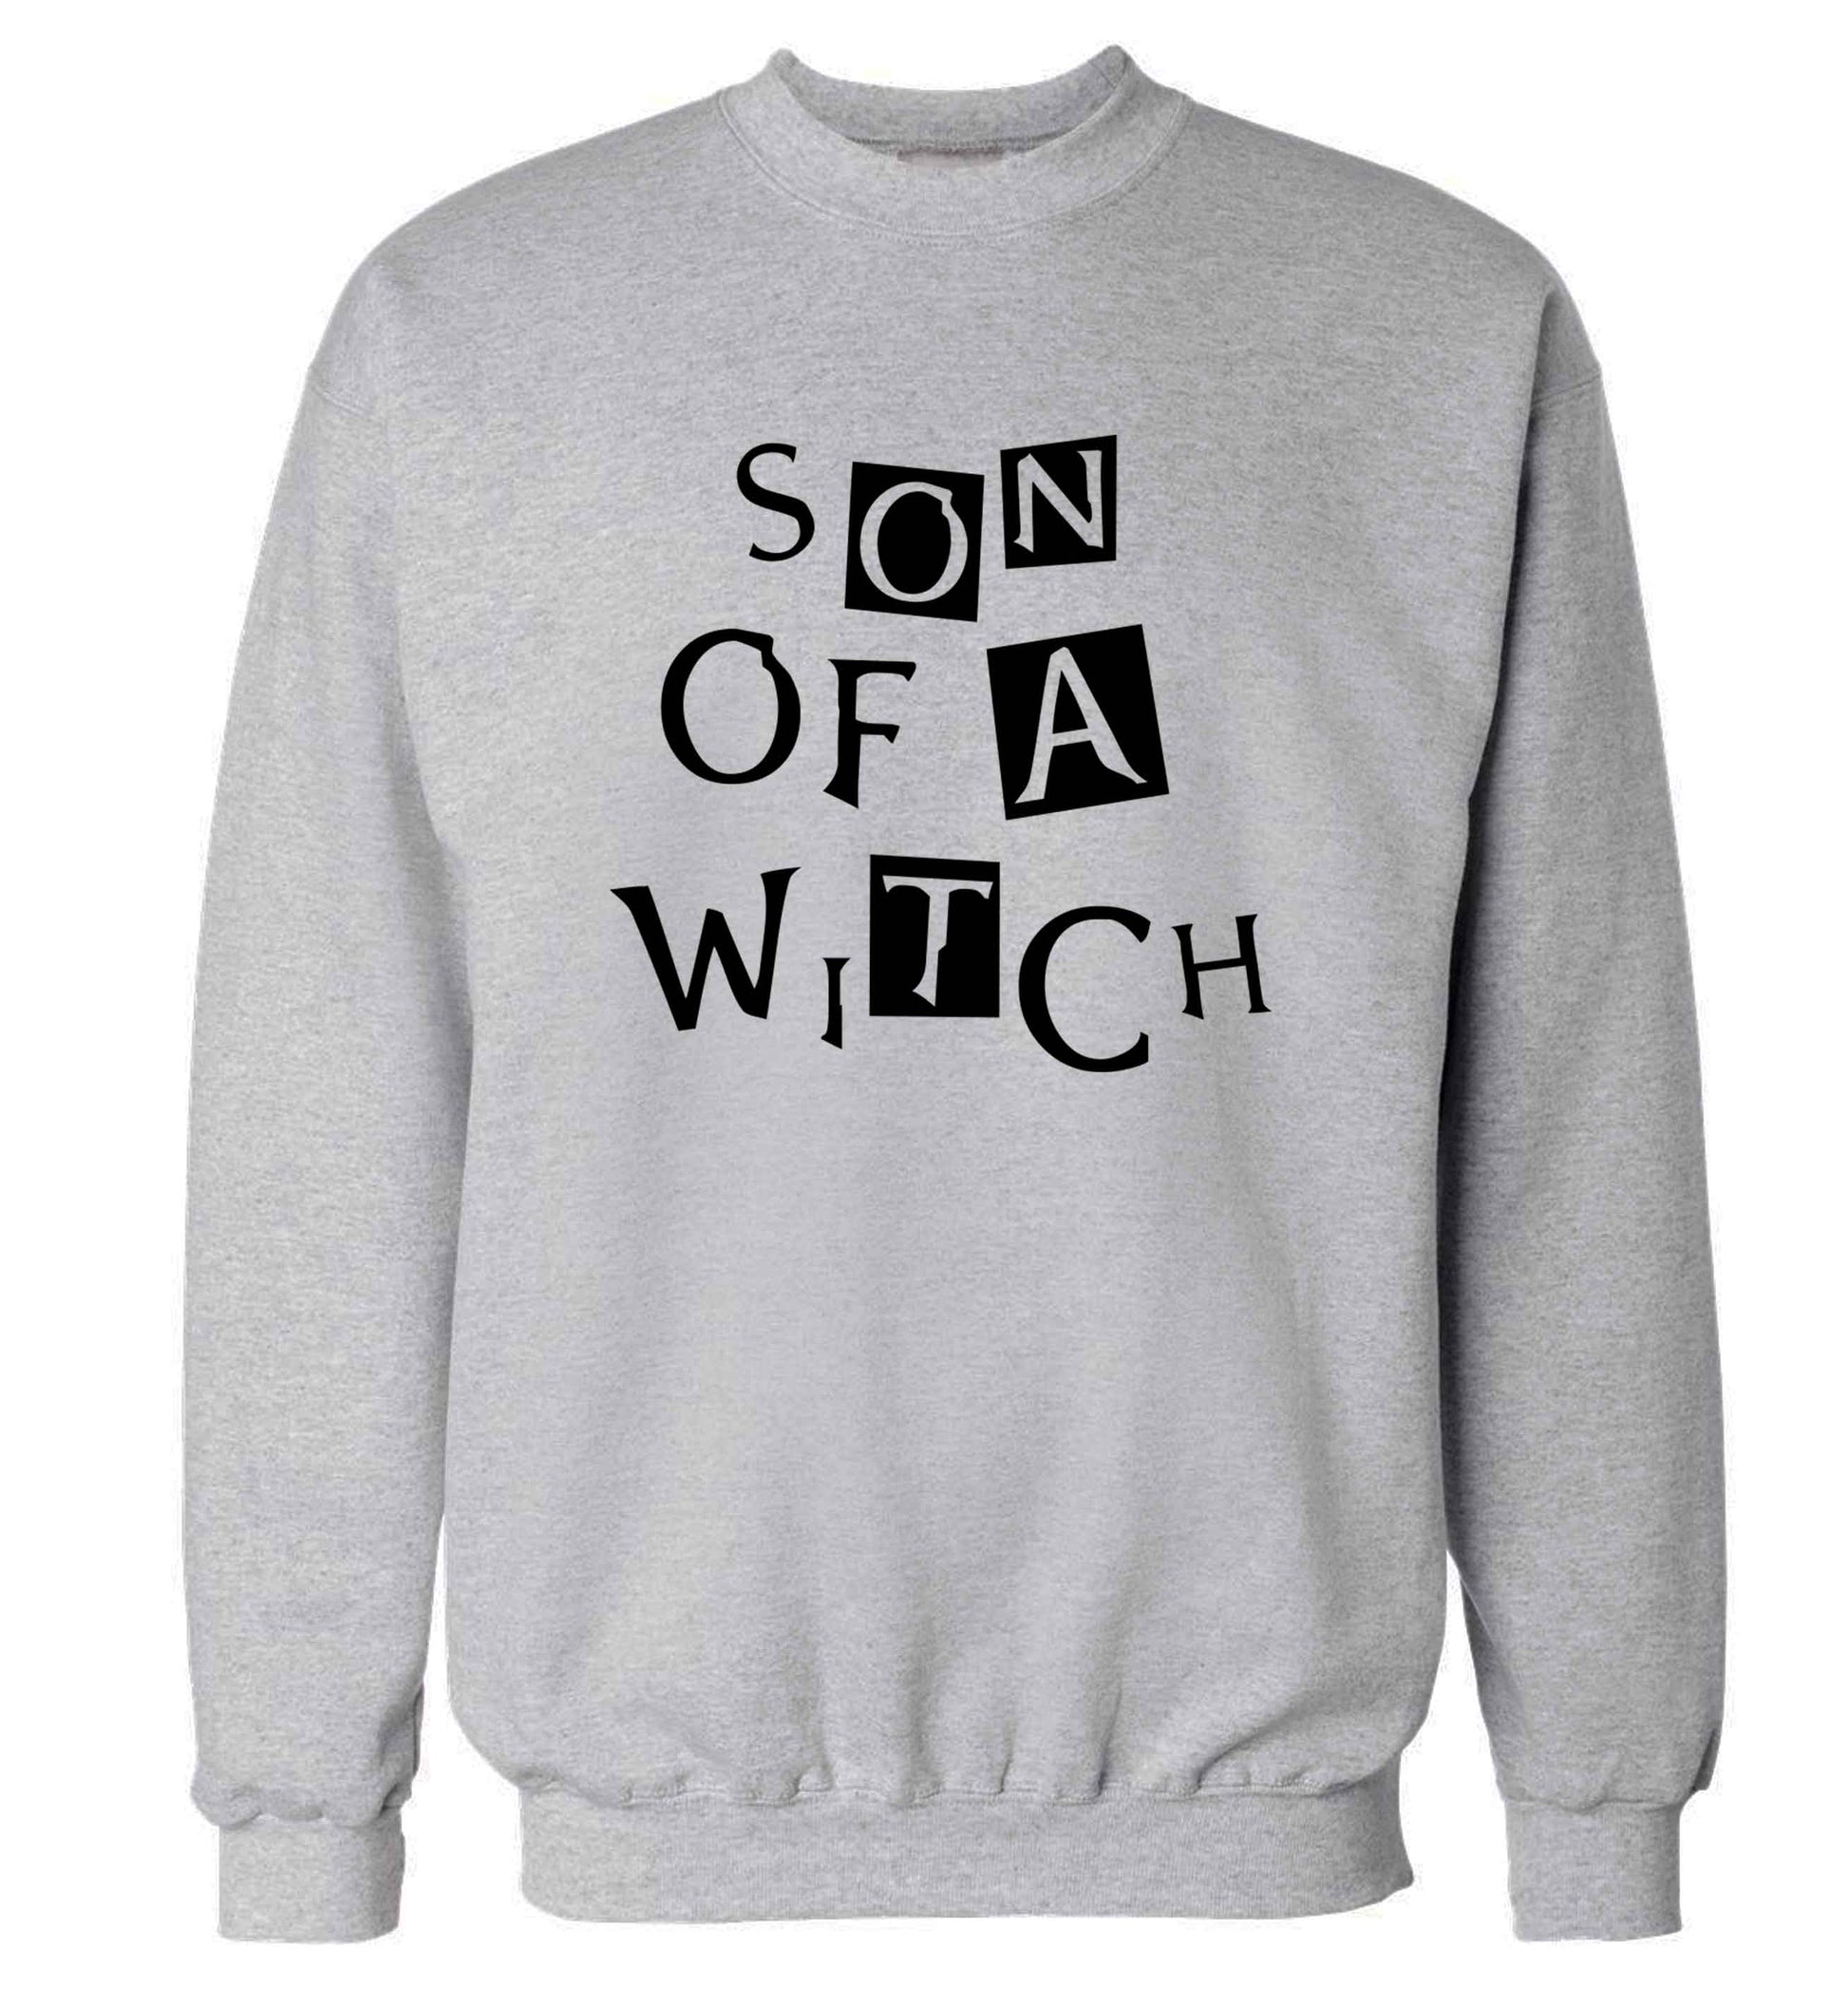 Son of a witch adult's unisex grey sweater 2XL